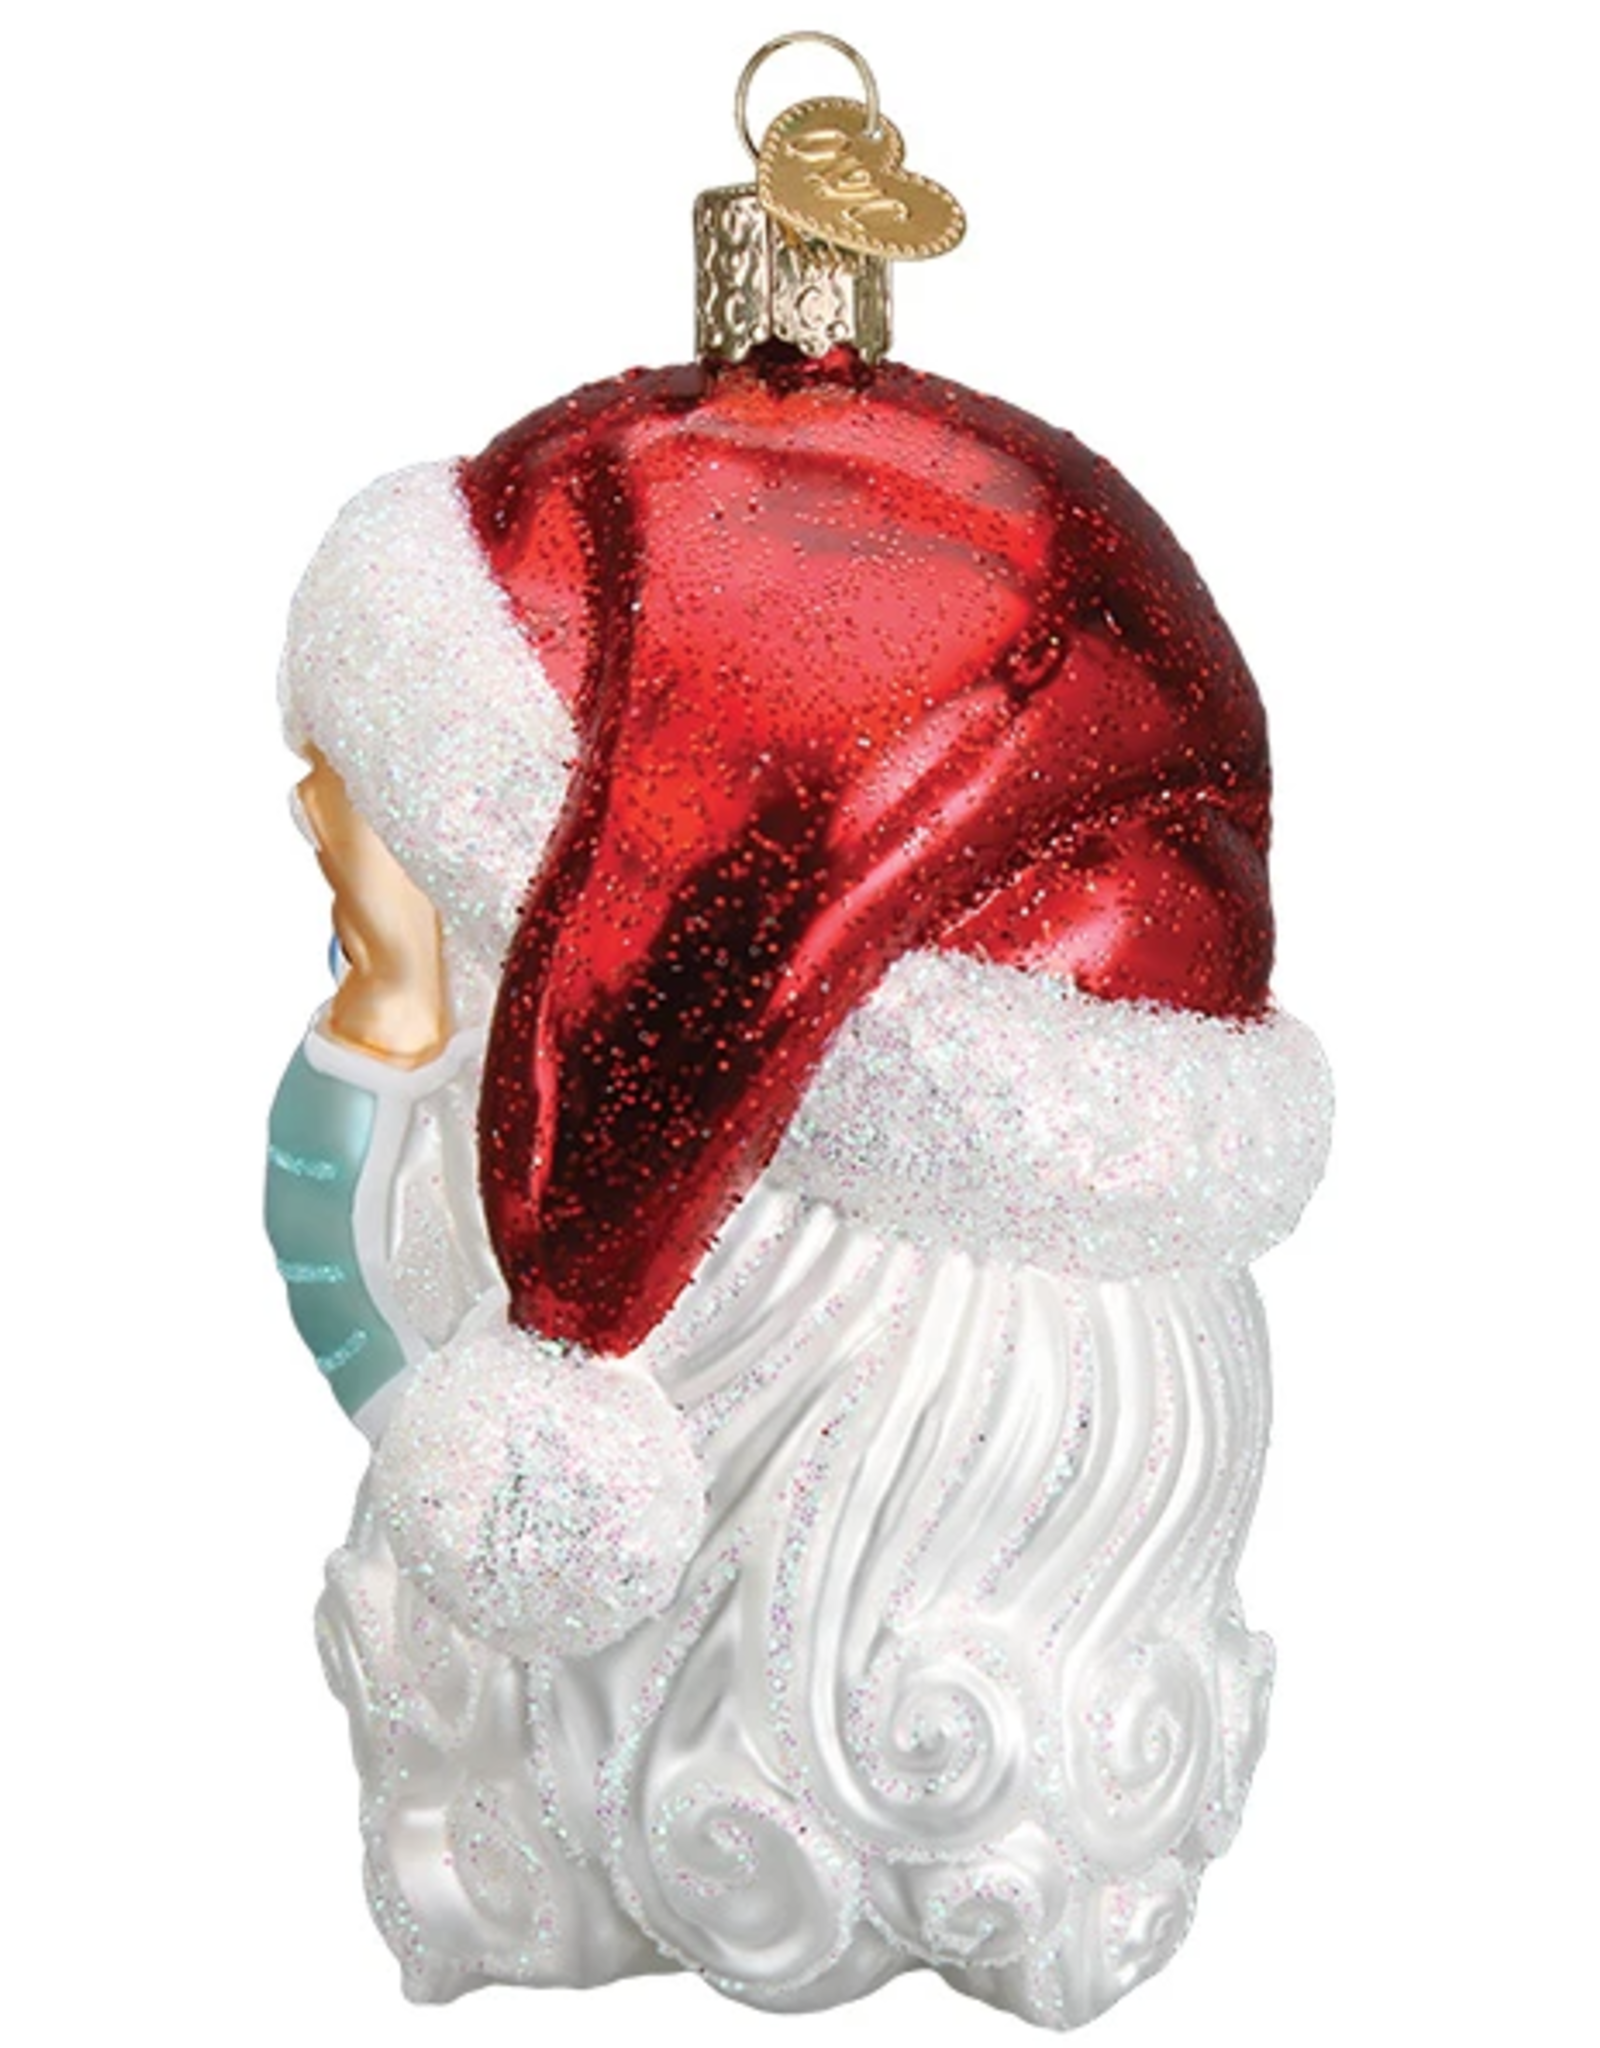 Santa With Face Mask Ornament